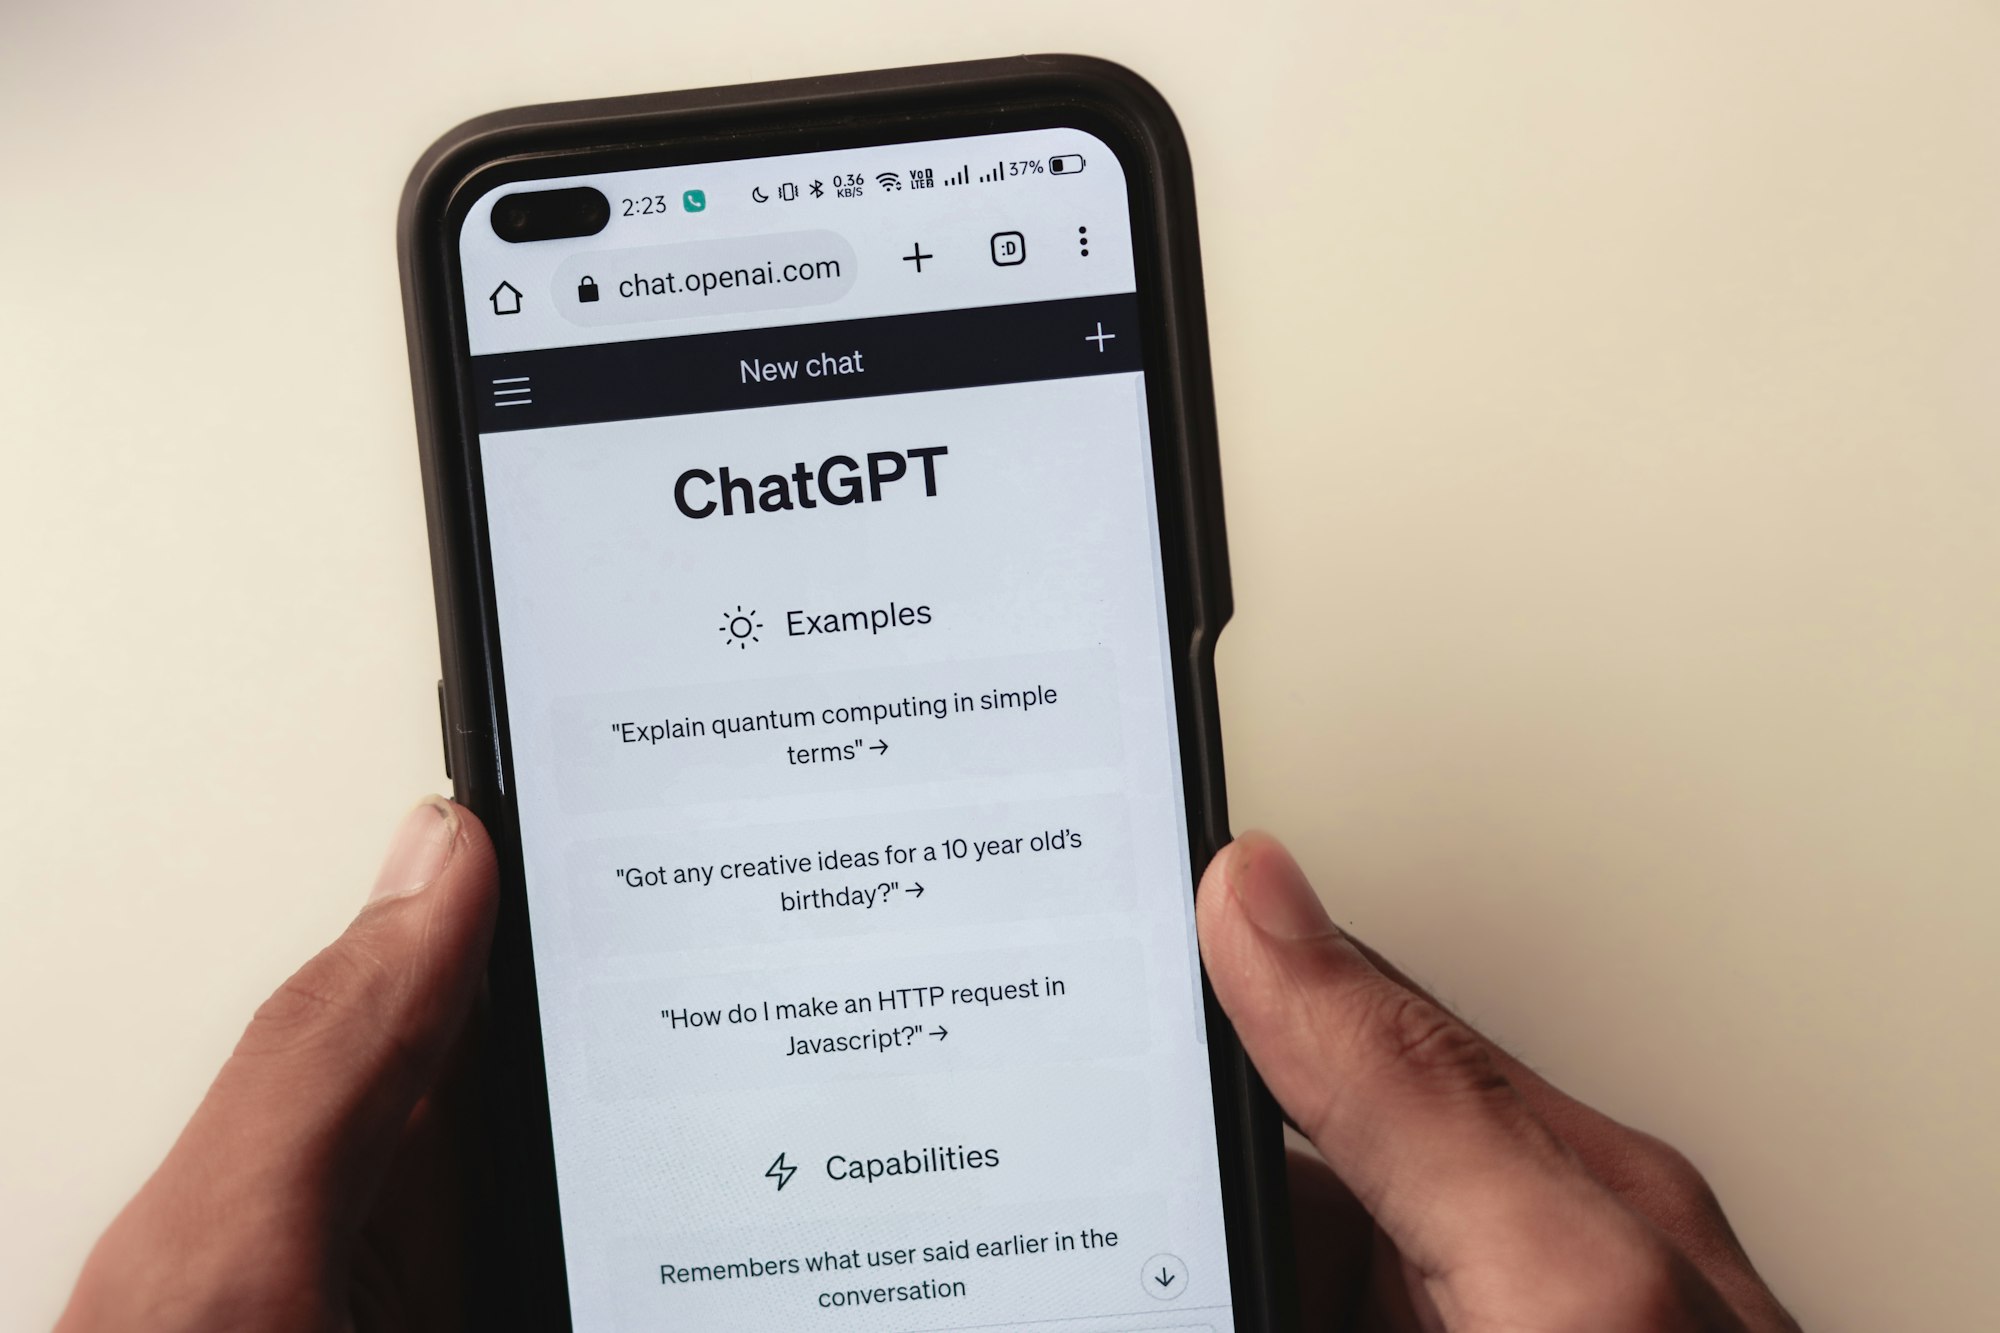 How to use ChatGPT 4 (ChatGPT examples for Shopify businesses)